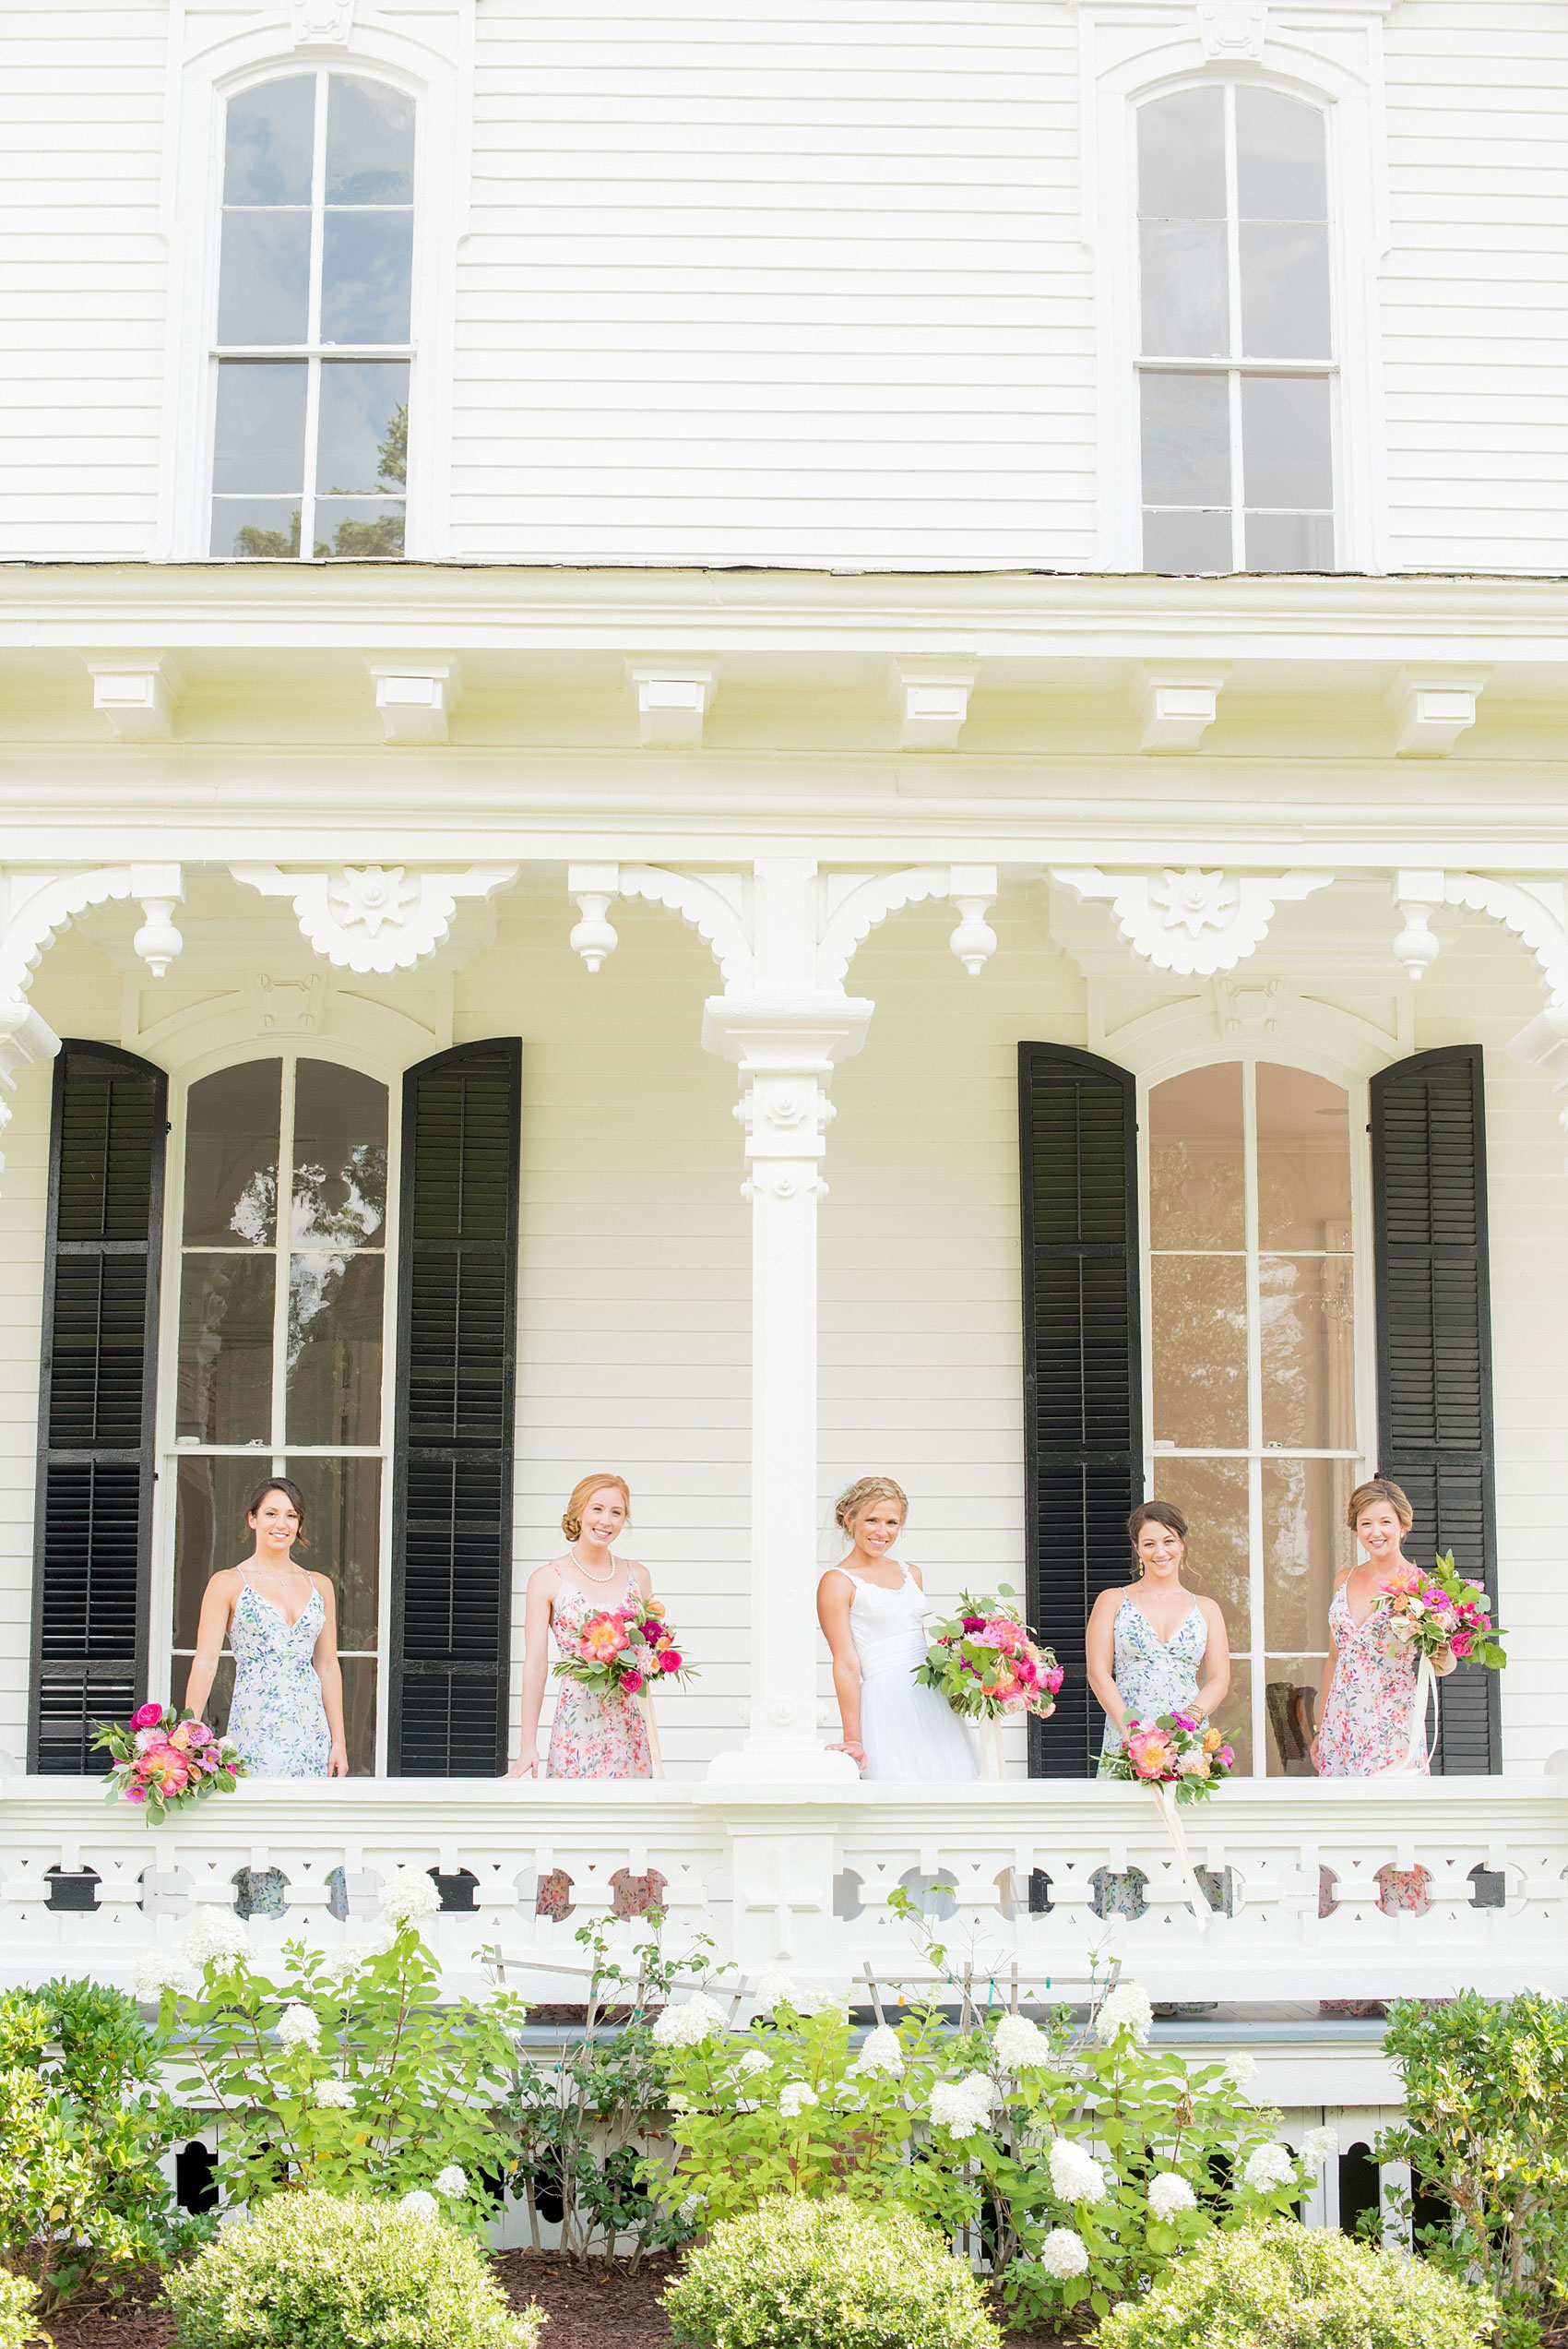 Mikkel Paige Photography wedding photos at The Merrimon-Wynne House in downtown Raleigh. Bridesmaids in floral maxi gowns with colorful pink, orange and green bouquets with peonies, eucalyptus and garden roses by Meristem Floral. 